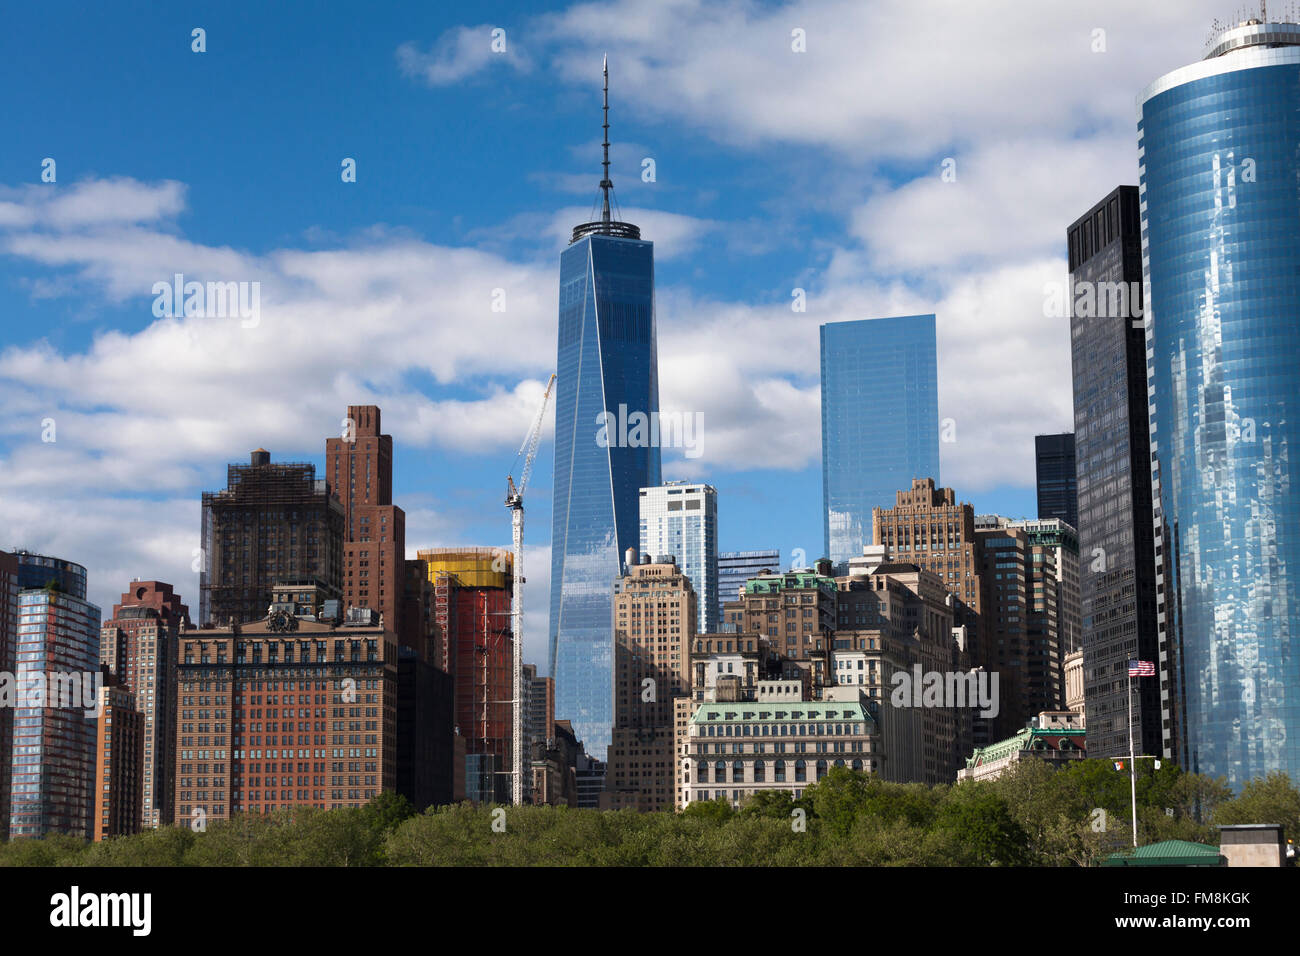 New York City Lower Manhattan skyline and architecture detail during sunny spring day in NYC, USA. Stock Photo